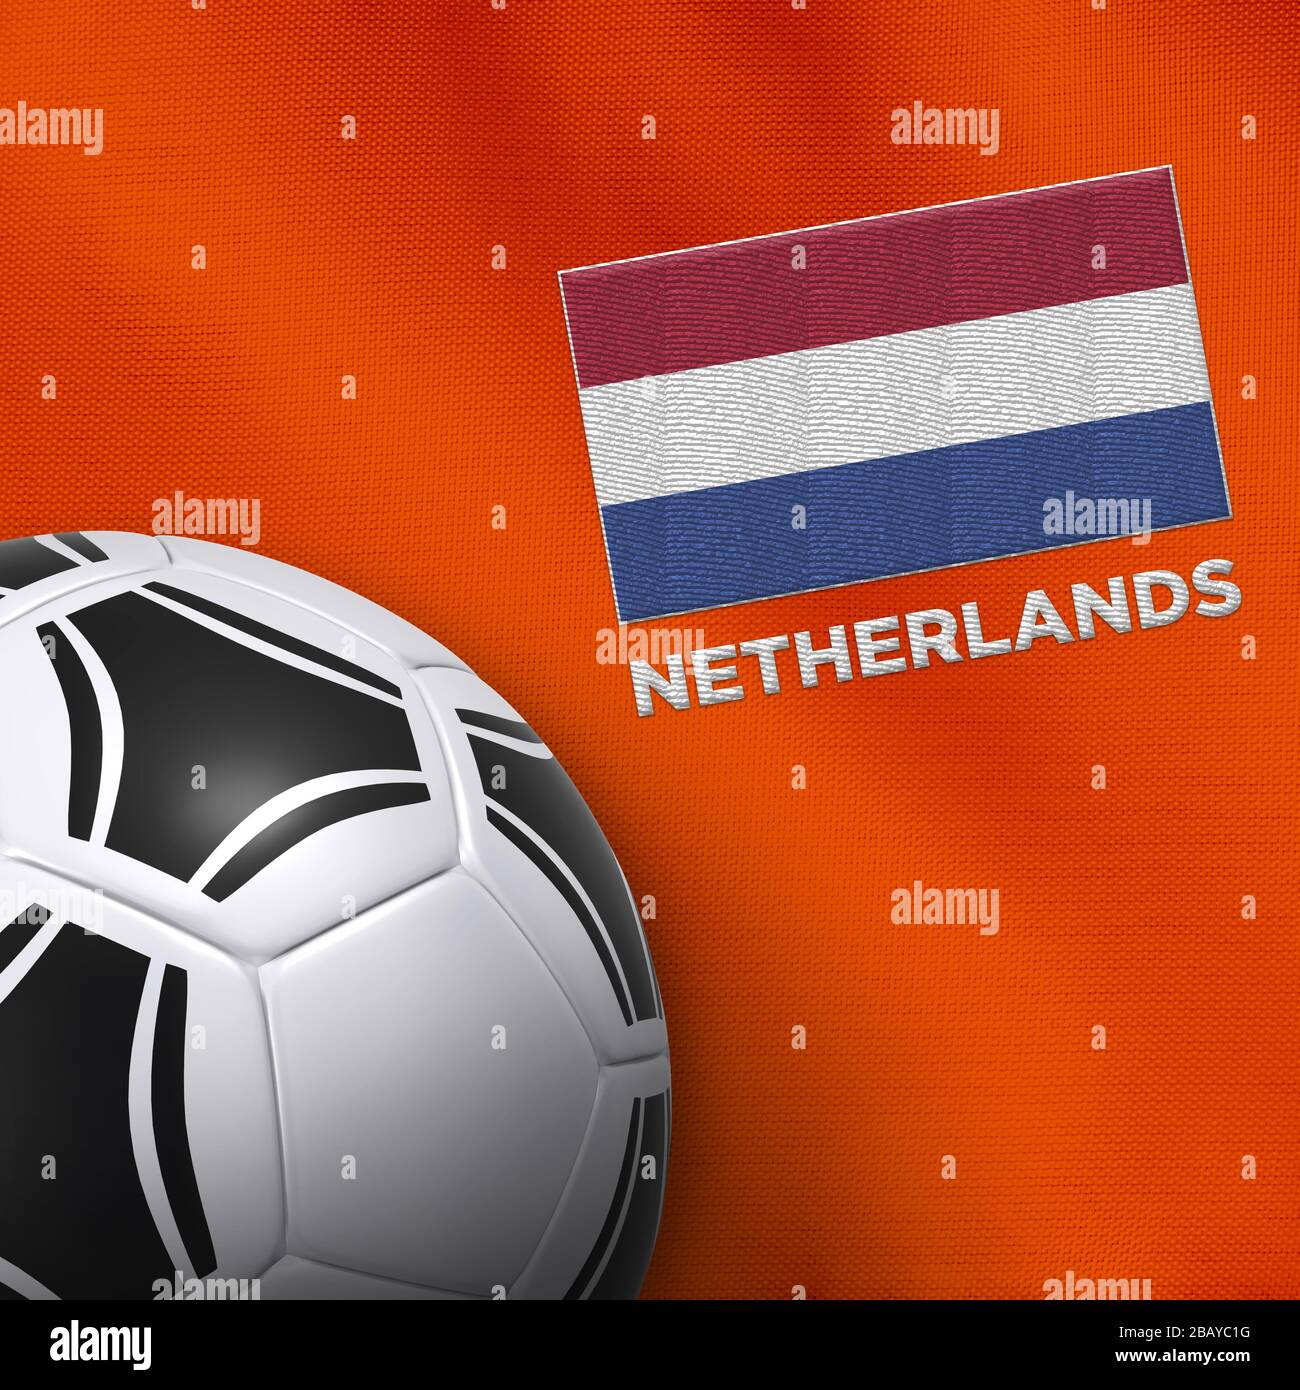 Football (soccer) ball and national team jersey of Netherlands (Holland). Stock Photo